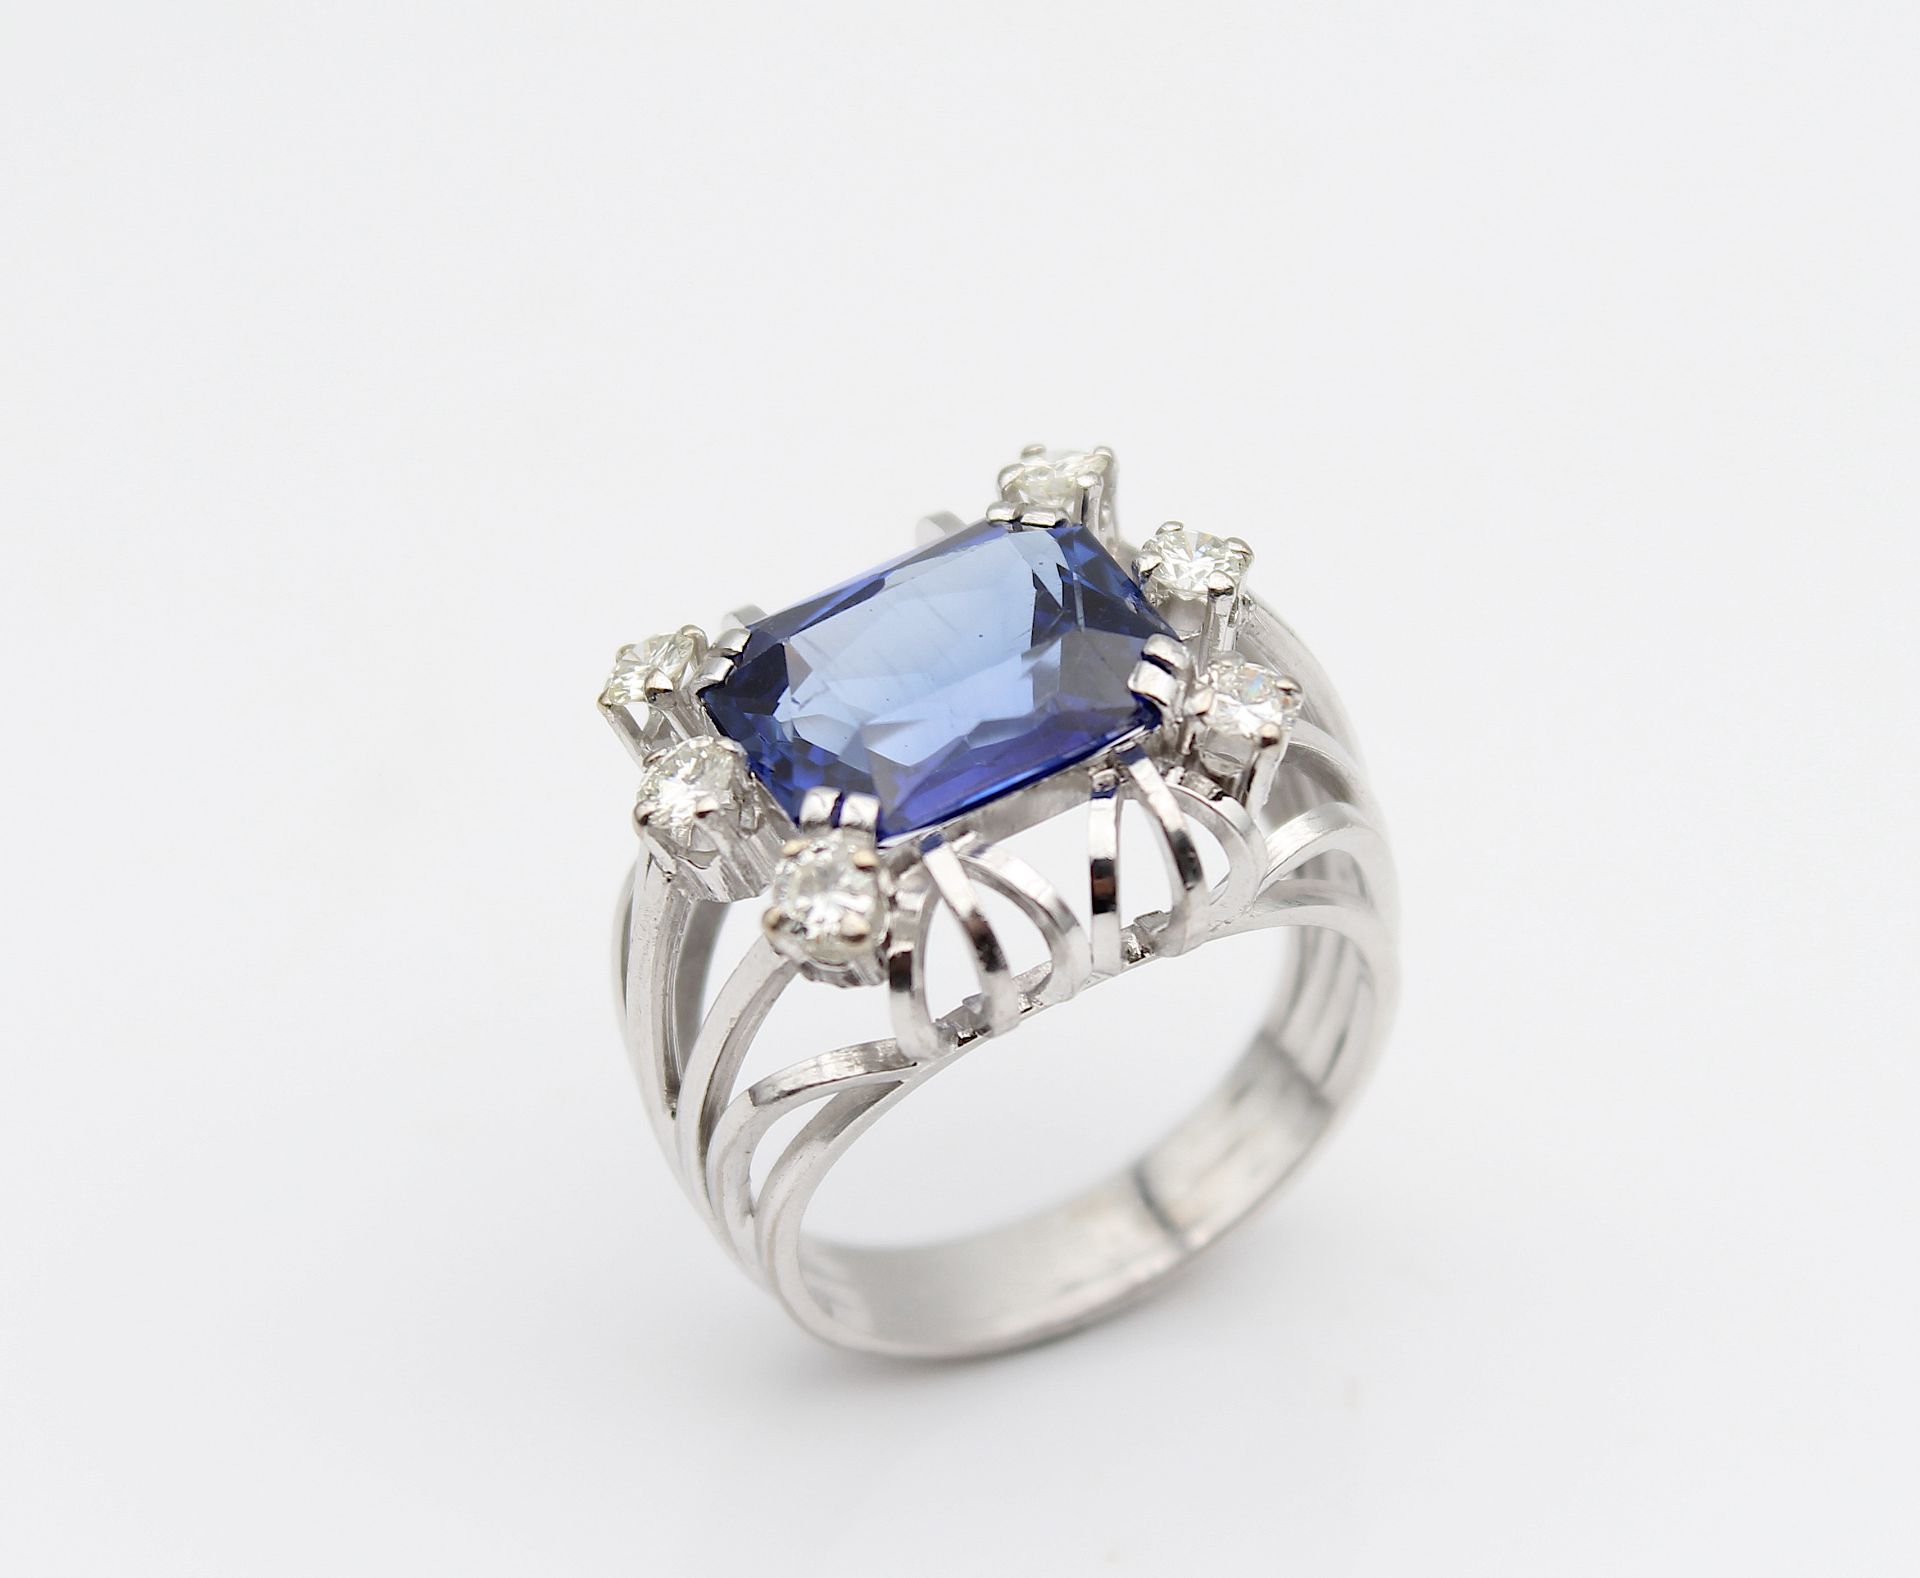 Imposing ring with a large synth. sapphire - Image 3 of 4